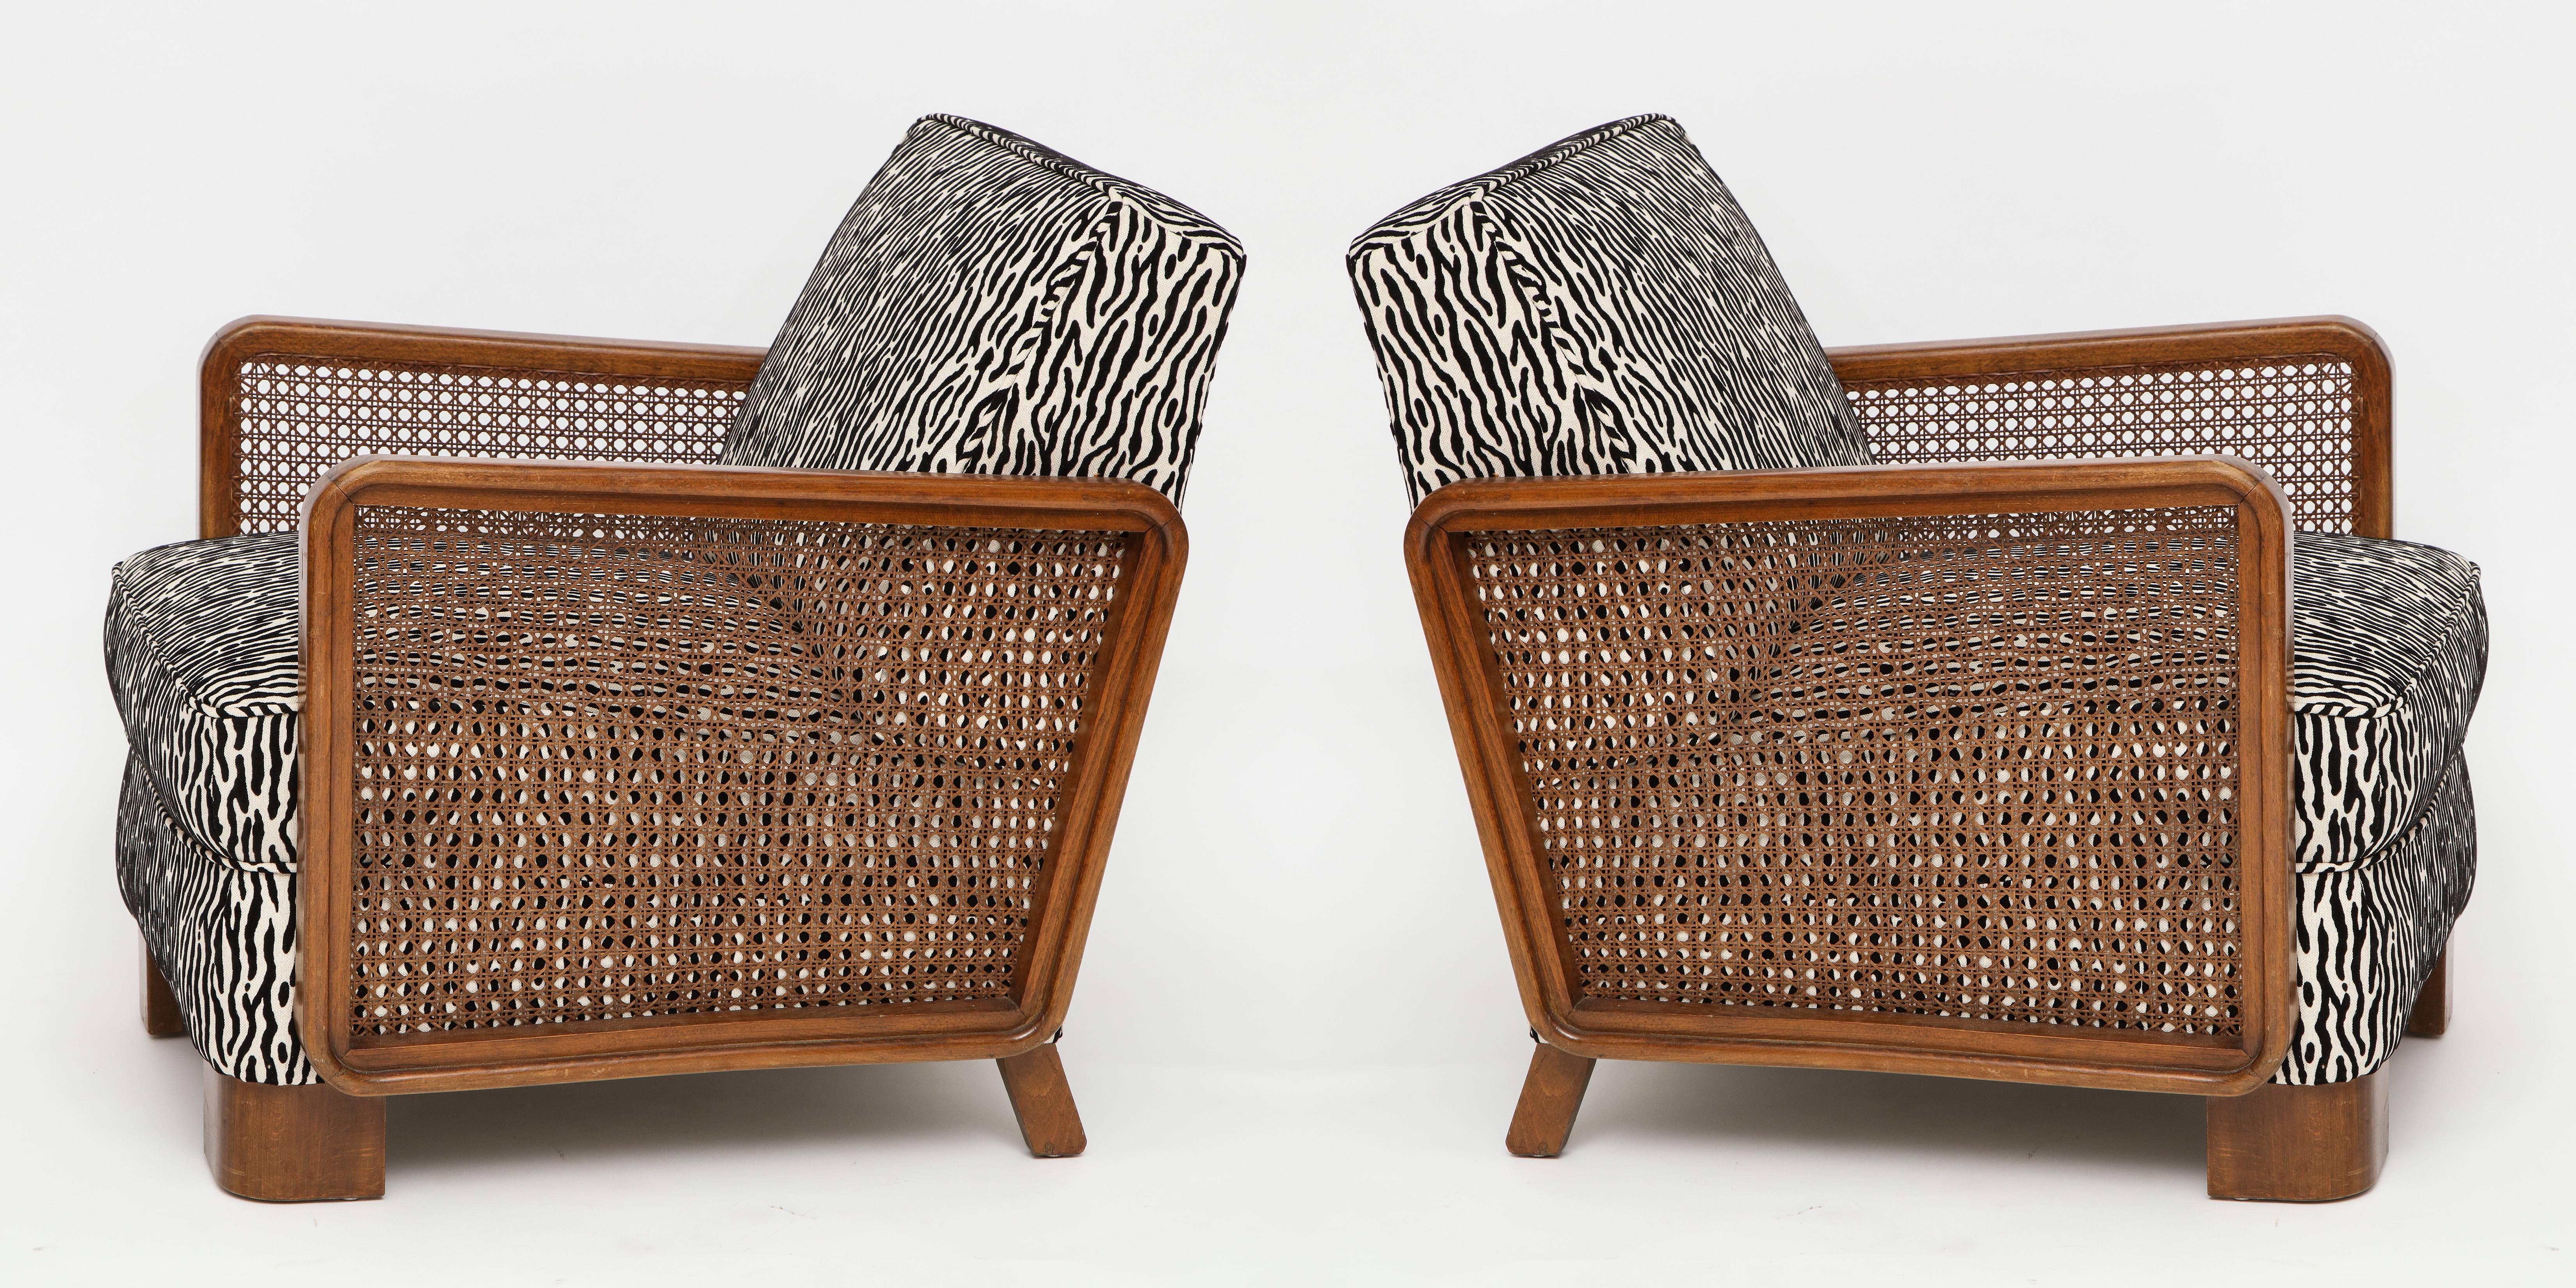 Pair of deco cane lounge chairs with black and white animal print, France, 1940s

Chic pair of French canned lounge chairs with beautiful linen and velvet animal fabric. Newly upholstered.
     